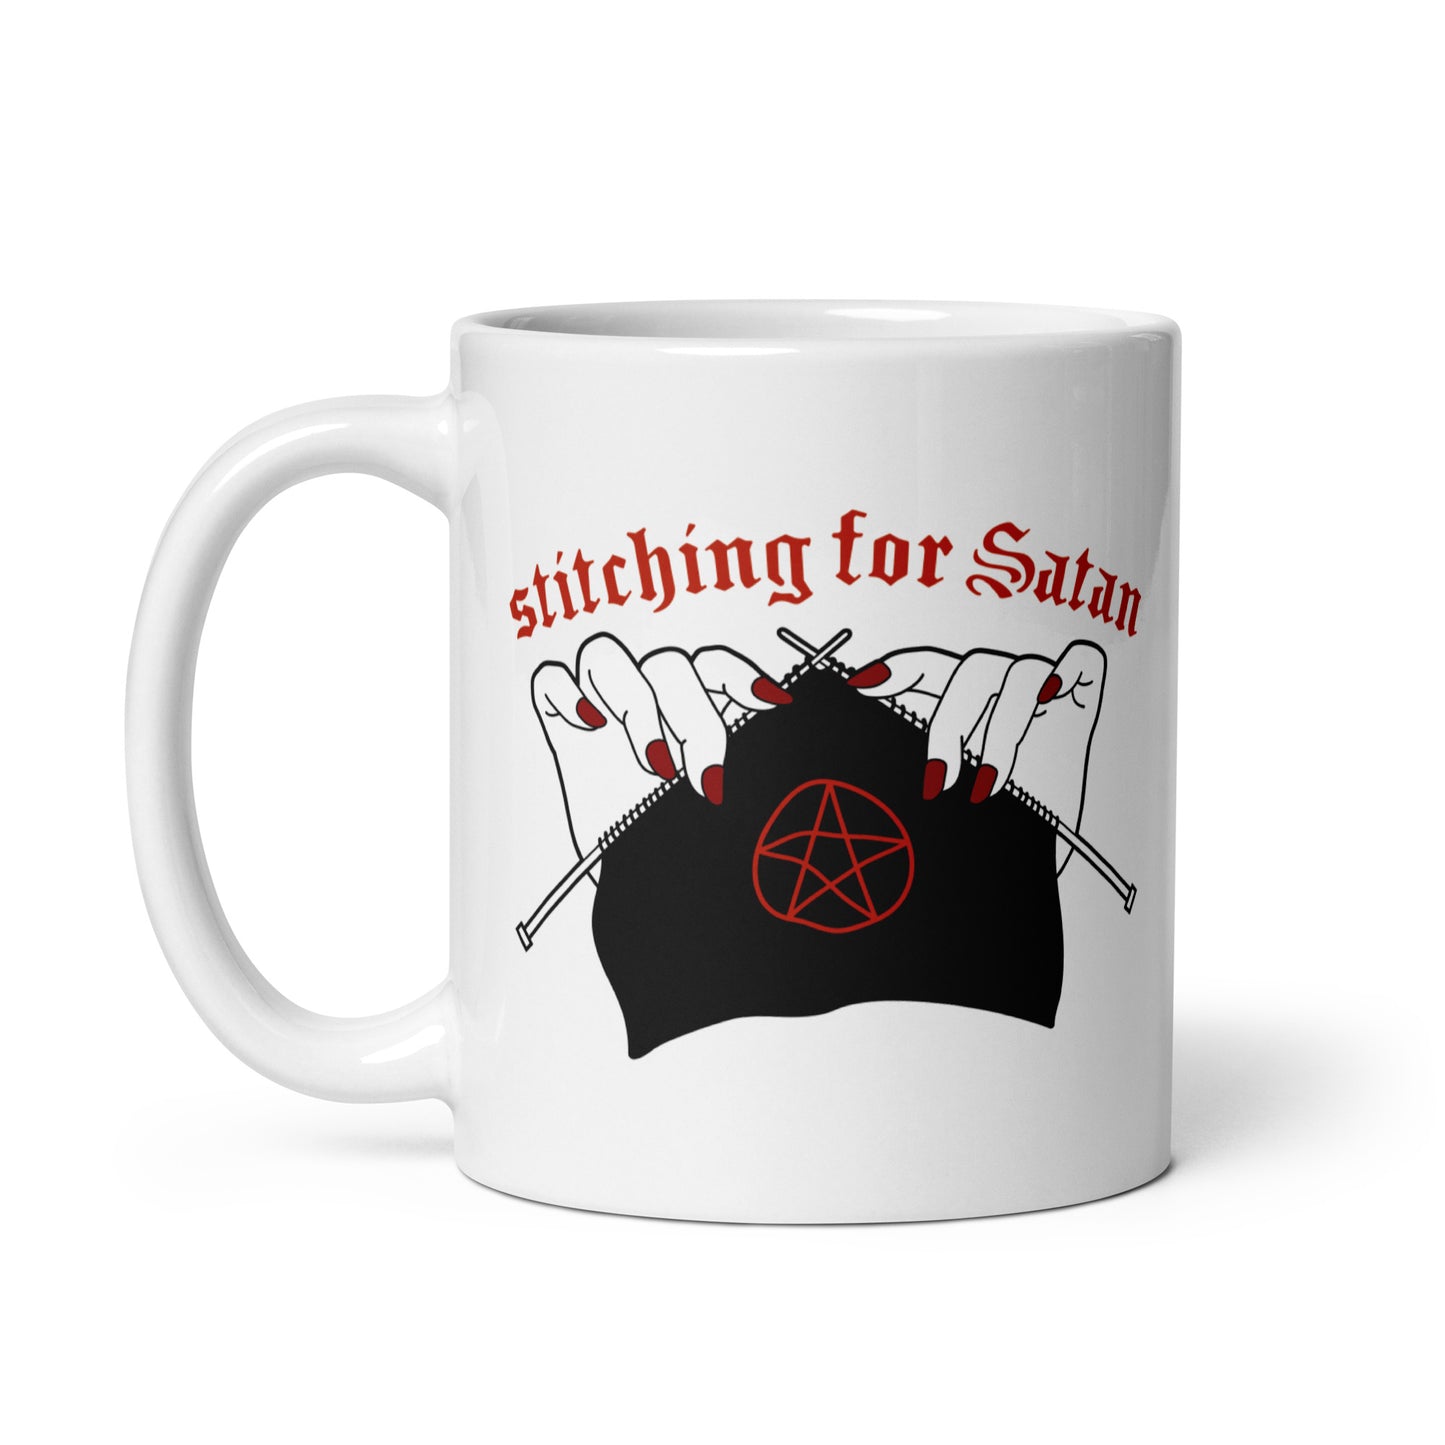 A white 11oz ceramic coffee mug featuring an illustration of pale white hands with red fingernails holding knitting needles. Fabric on the needles features a red pentagram. Text above the hands reads "stitching for Satan" in a gothc red font.